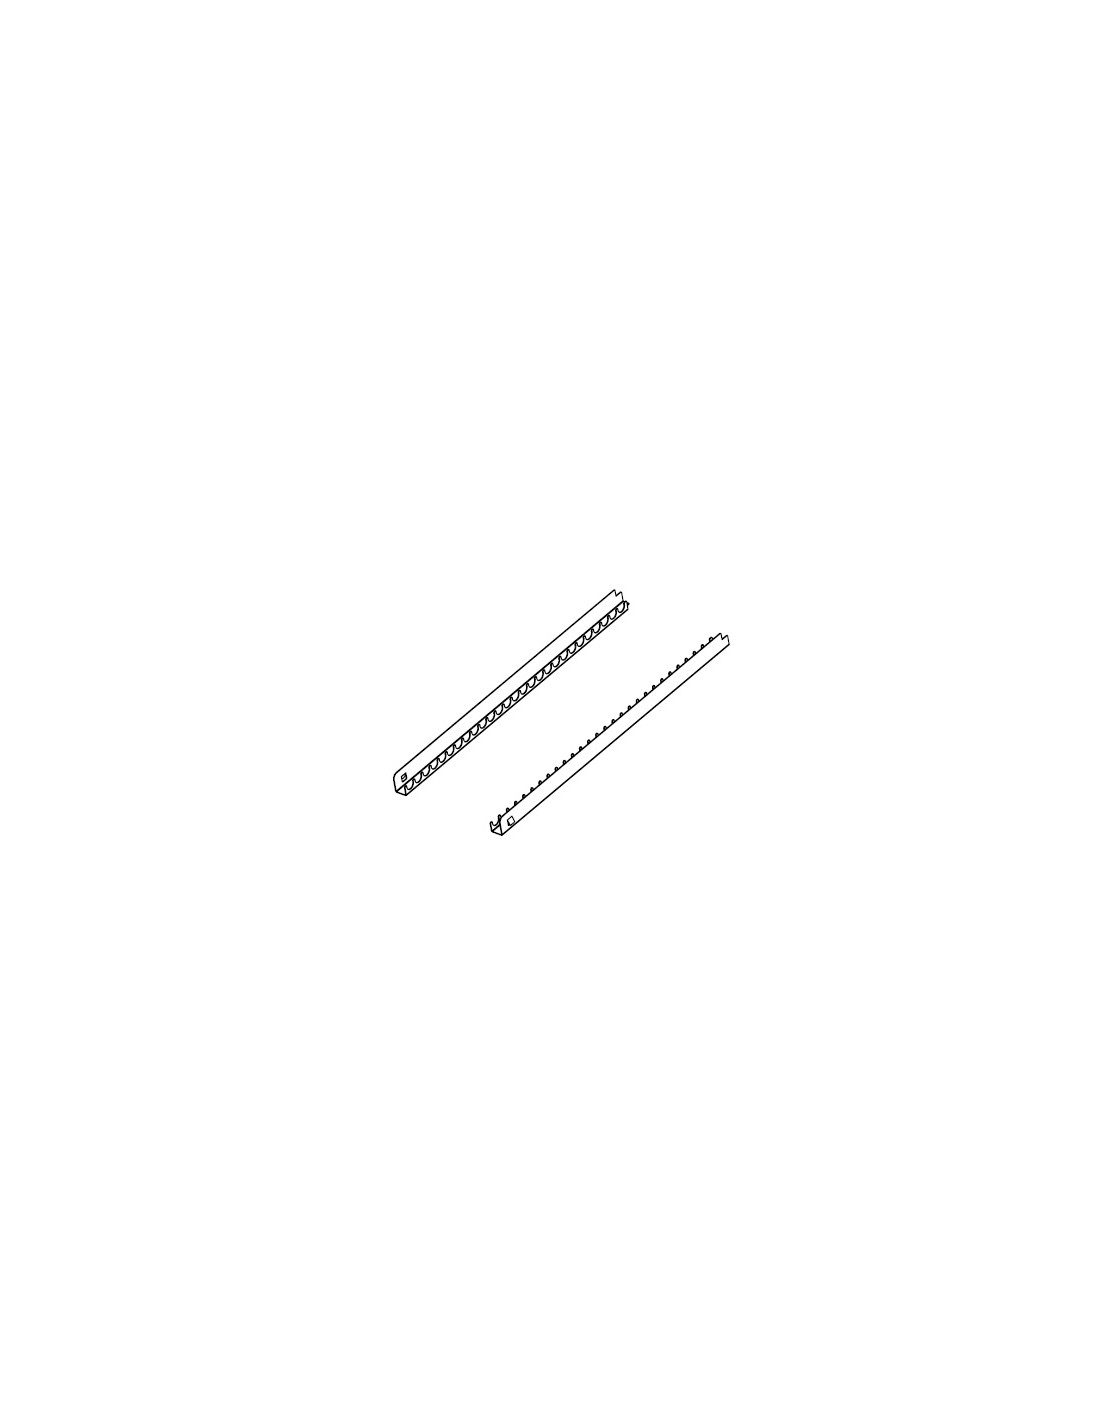 Pair of stainless steel guides for cured bars(40Kg)